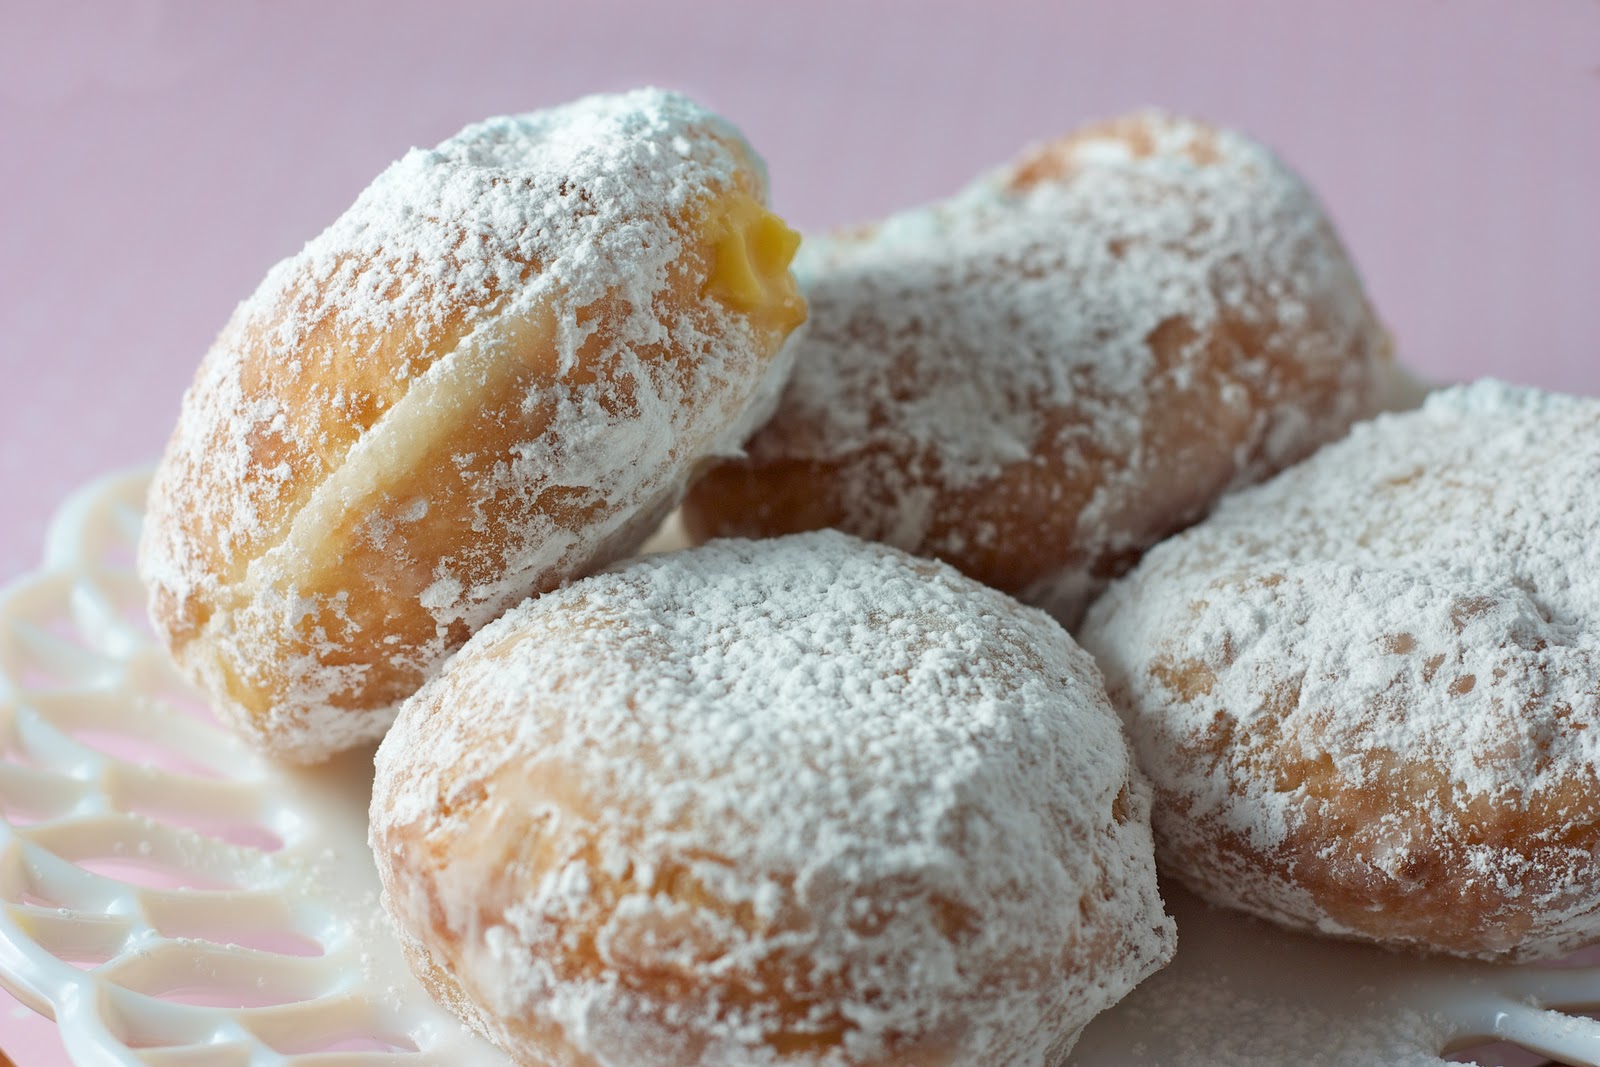 Where Can You Go for the Best PACZKI? #